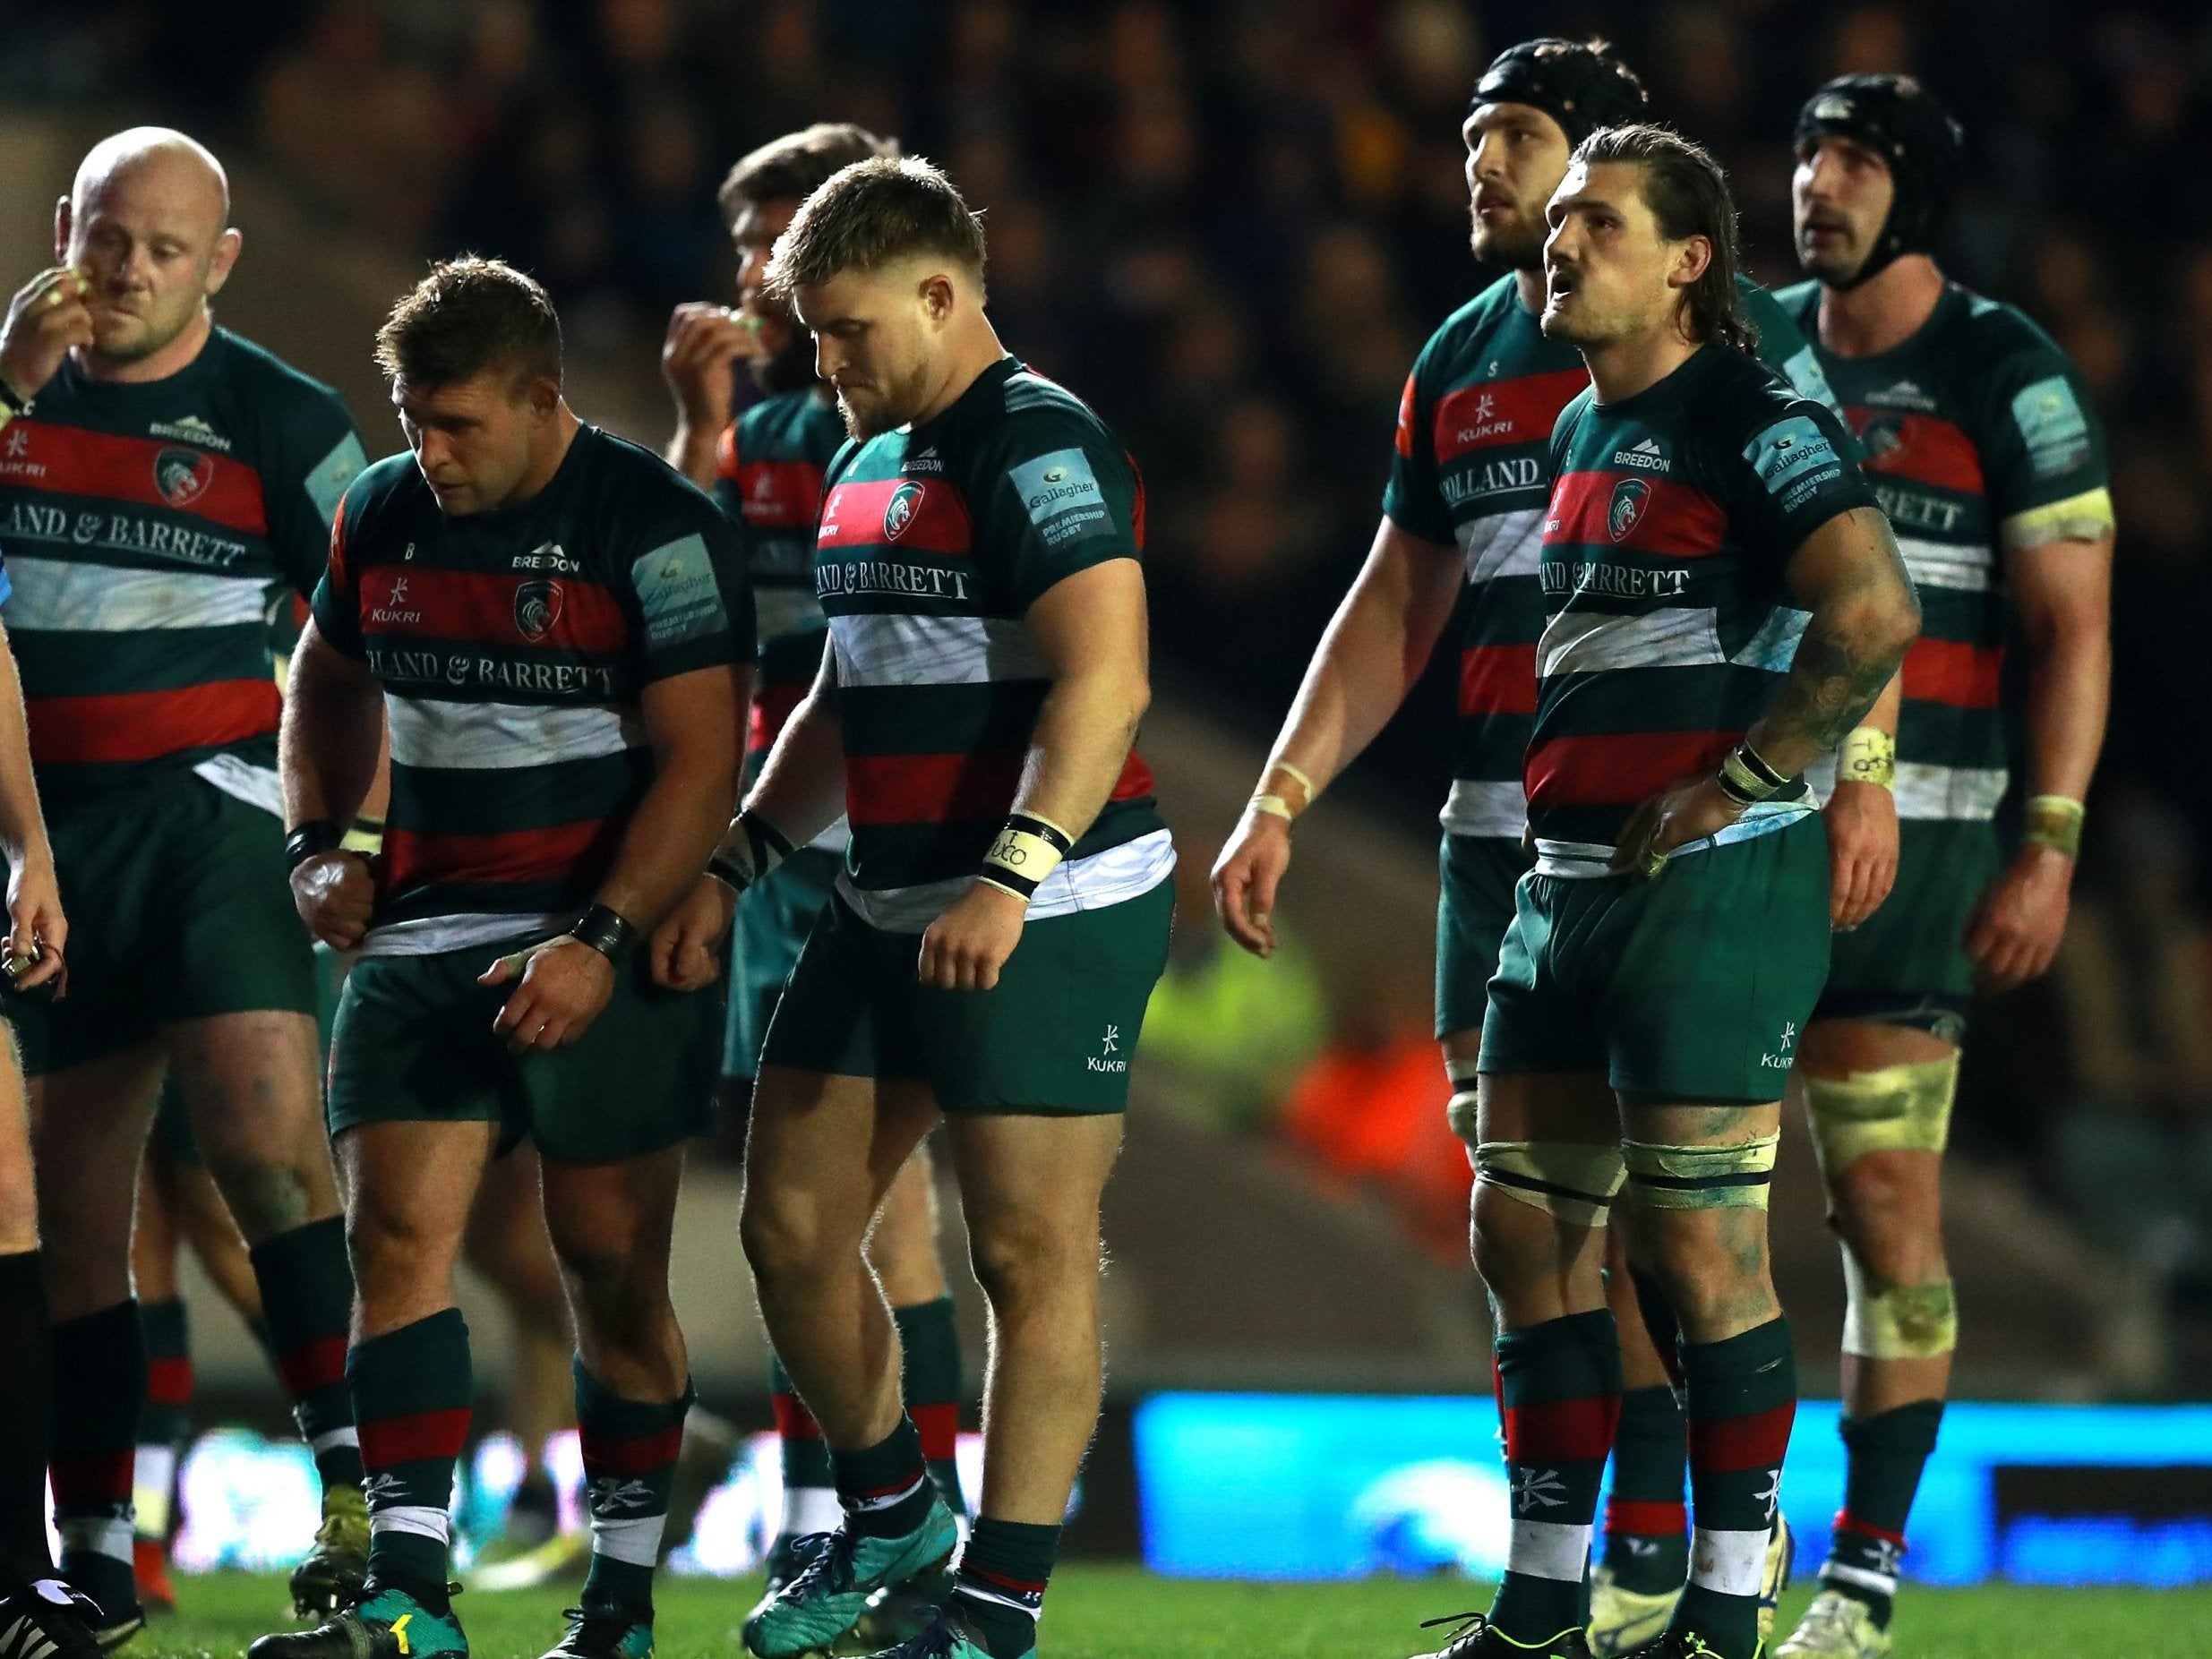 Leicester Tigers find themselves nine points above relegation after a 29-15 defeat by Northampton Saints